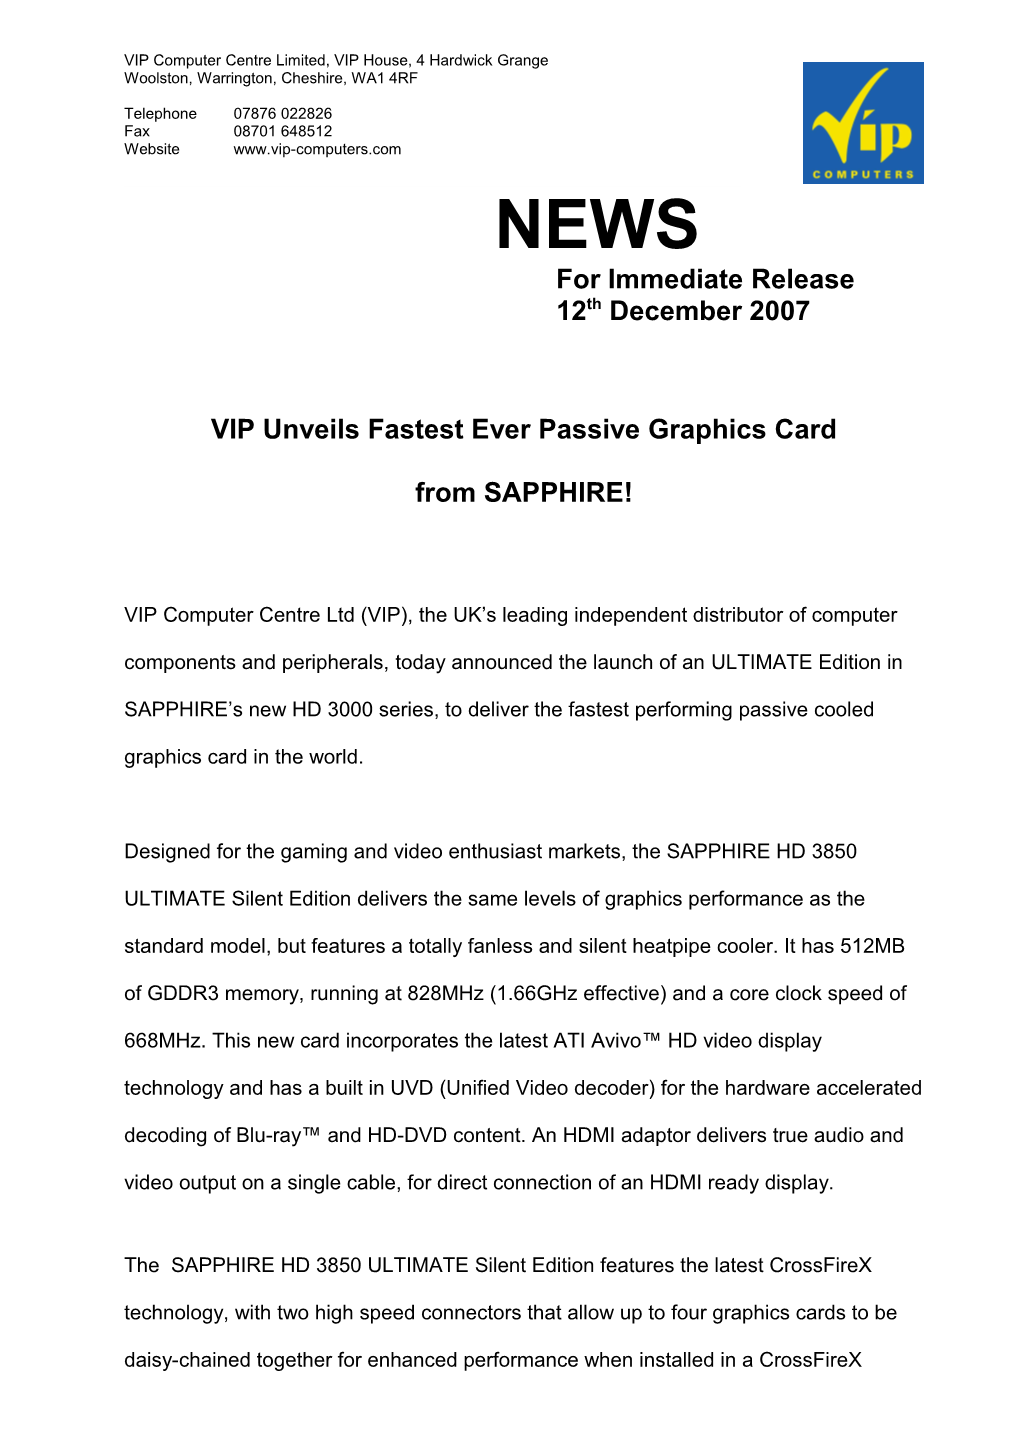 Vipunveilsfastest Ever Passive Graphics Card